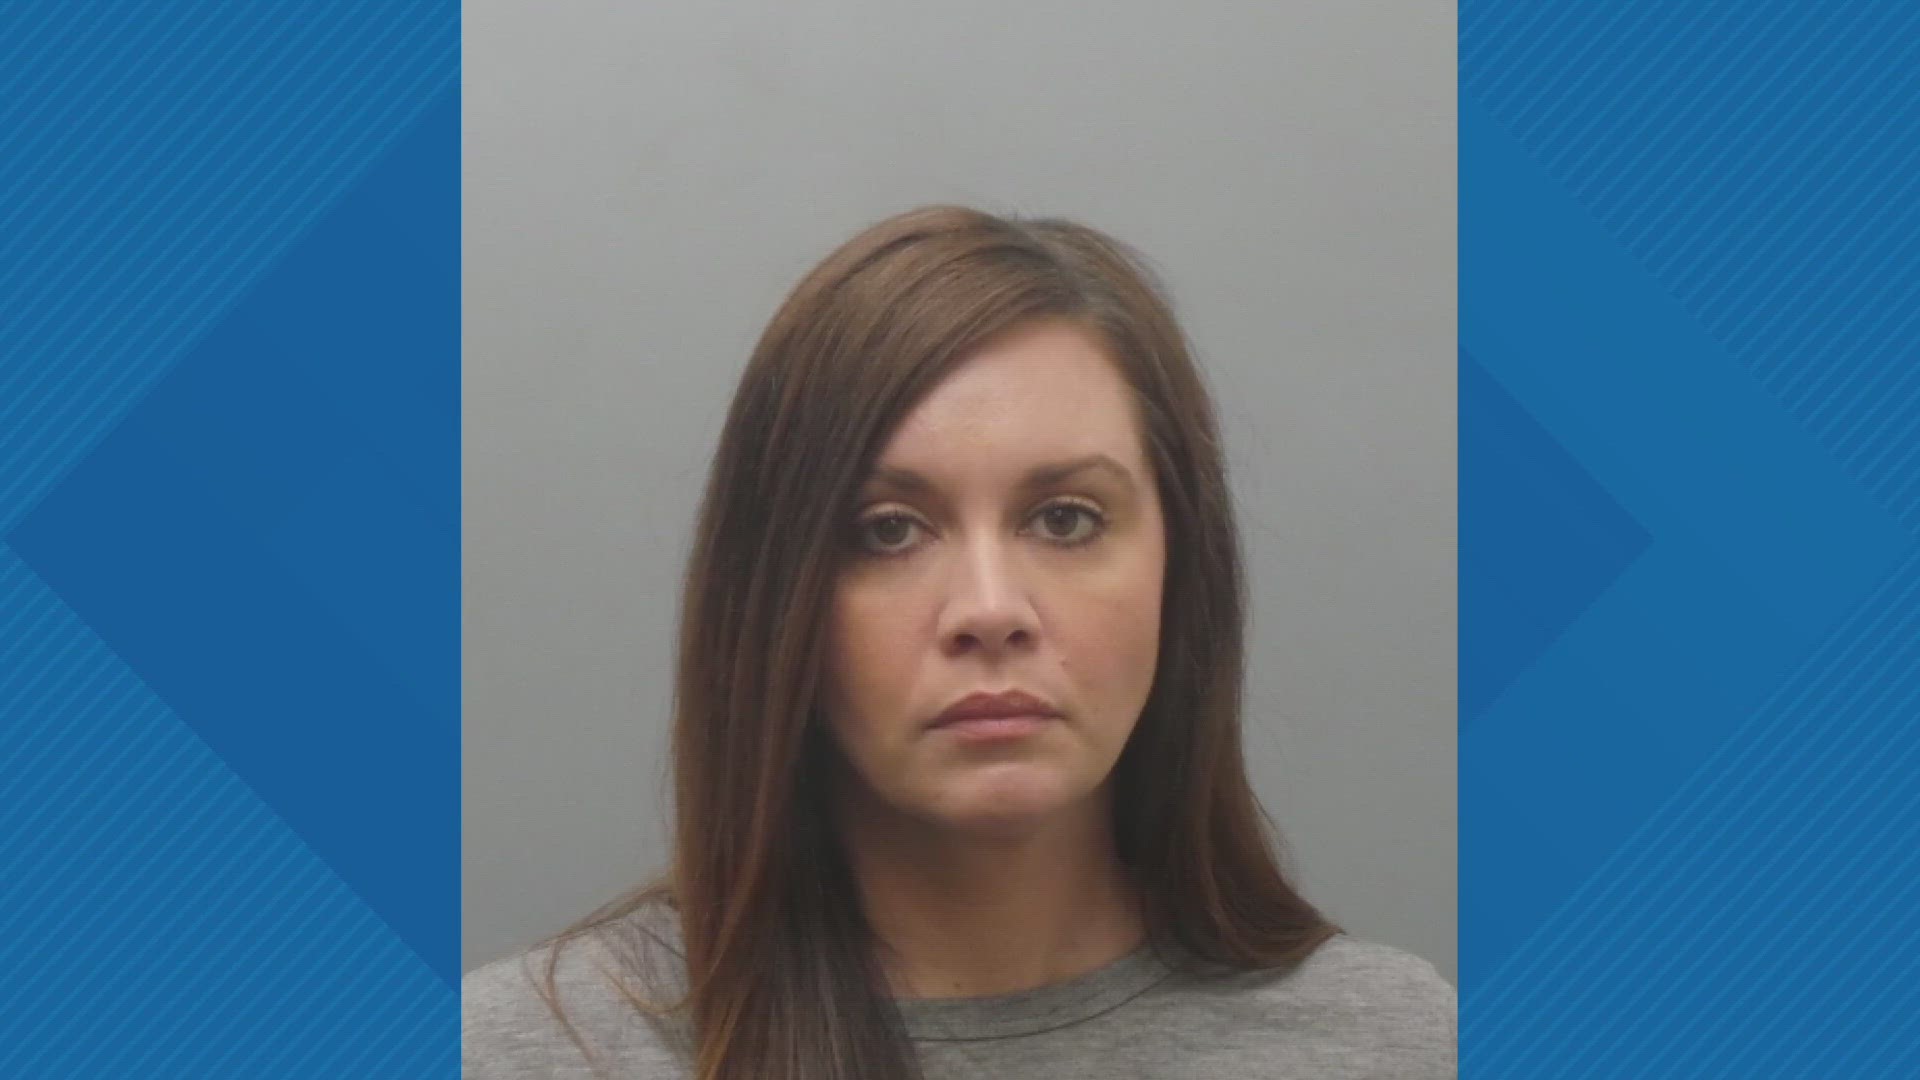 A St. Louis County judge reduced the bond Thursday for a former nurse at St. John Vianney High School. She has been charged with sexually assaulting a student.